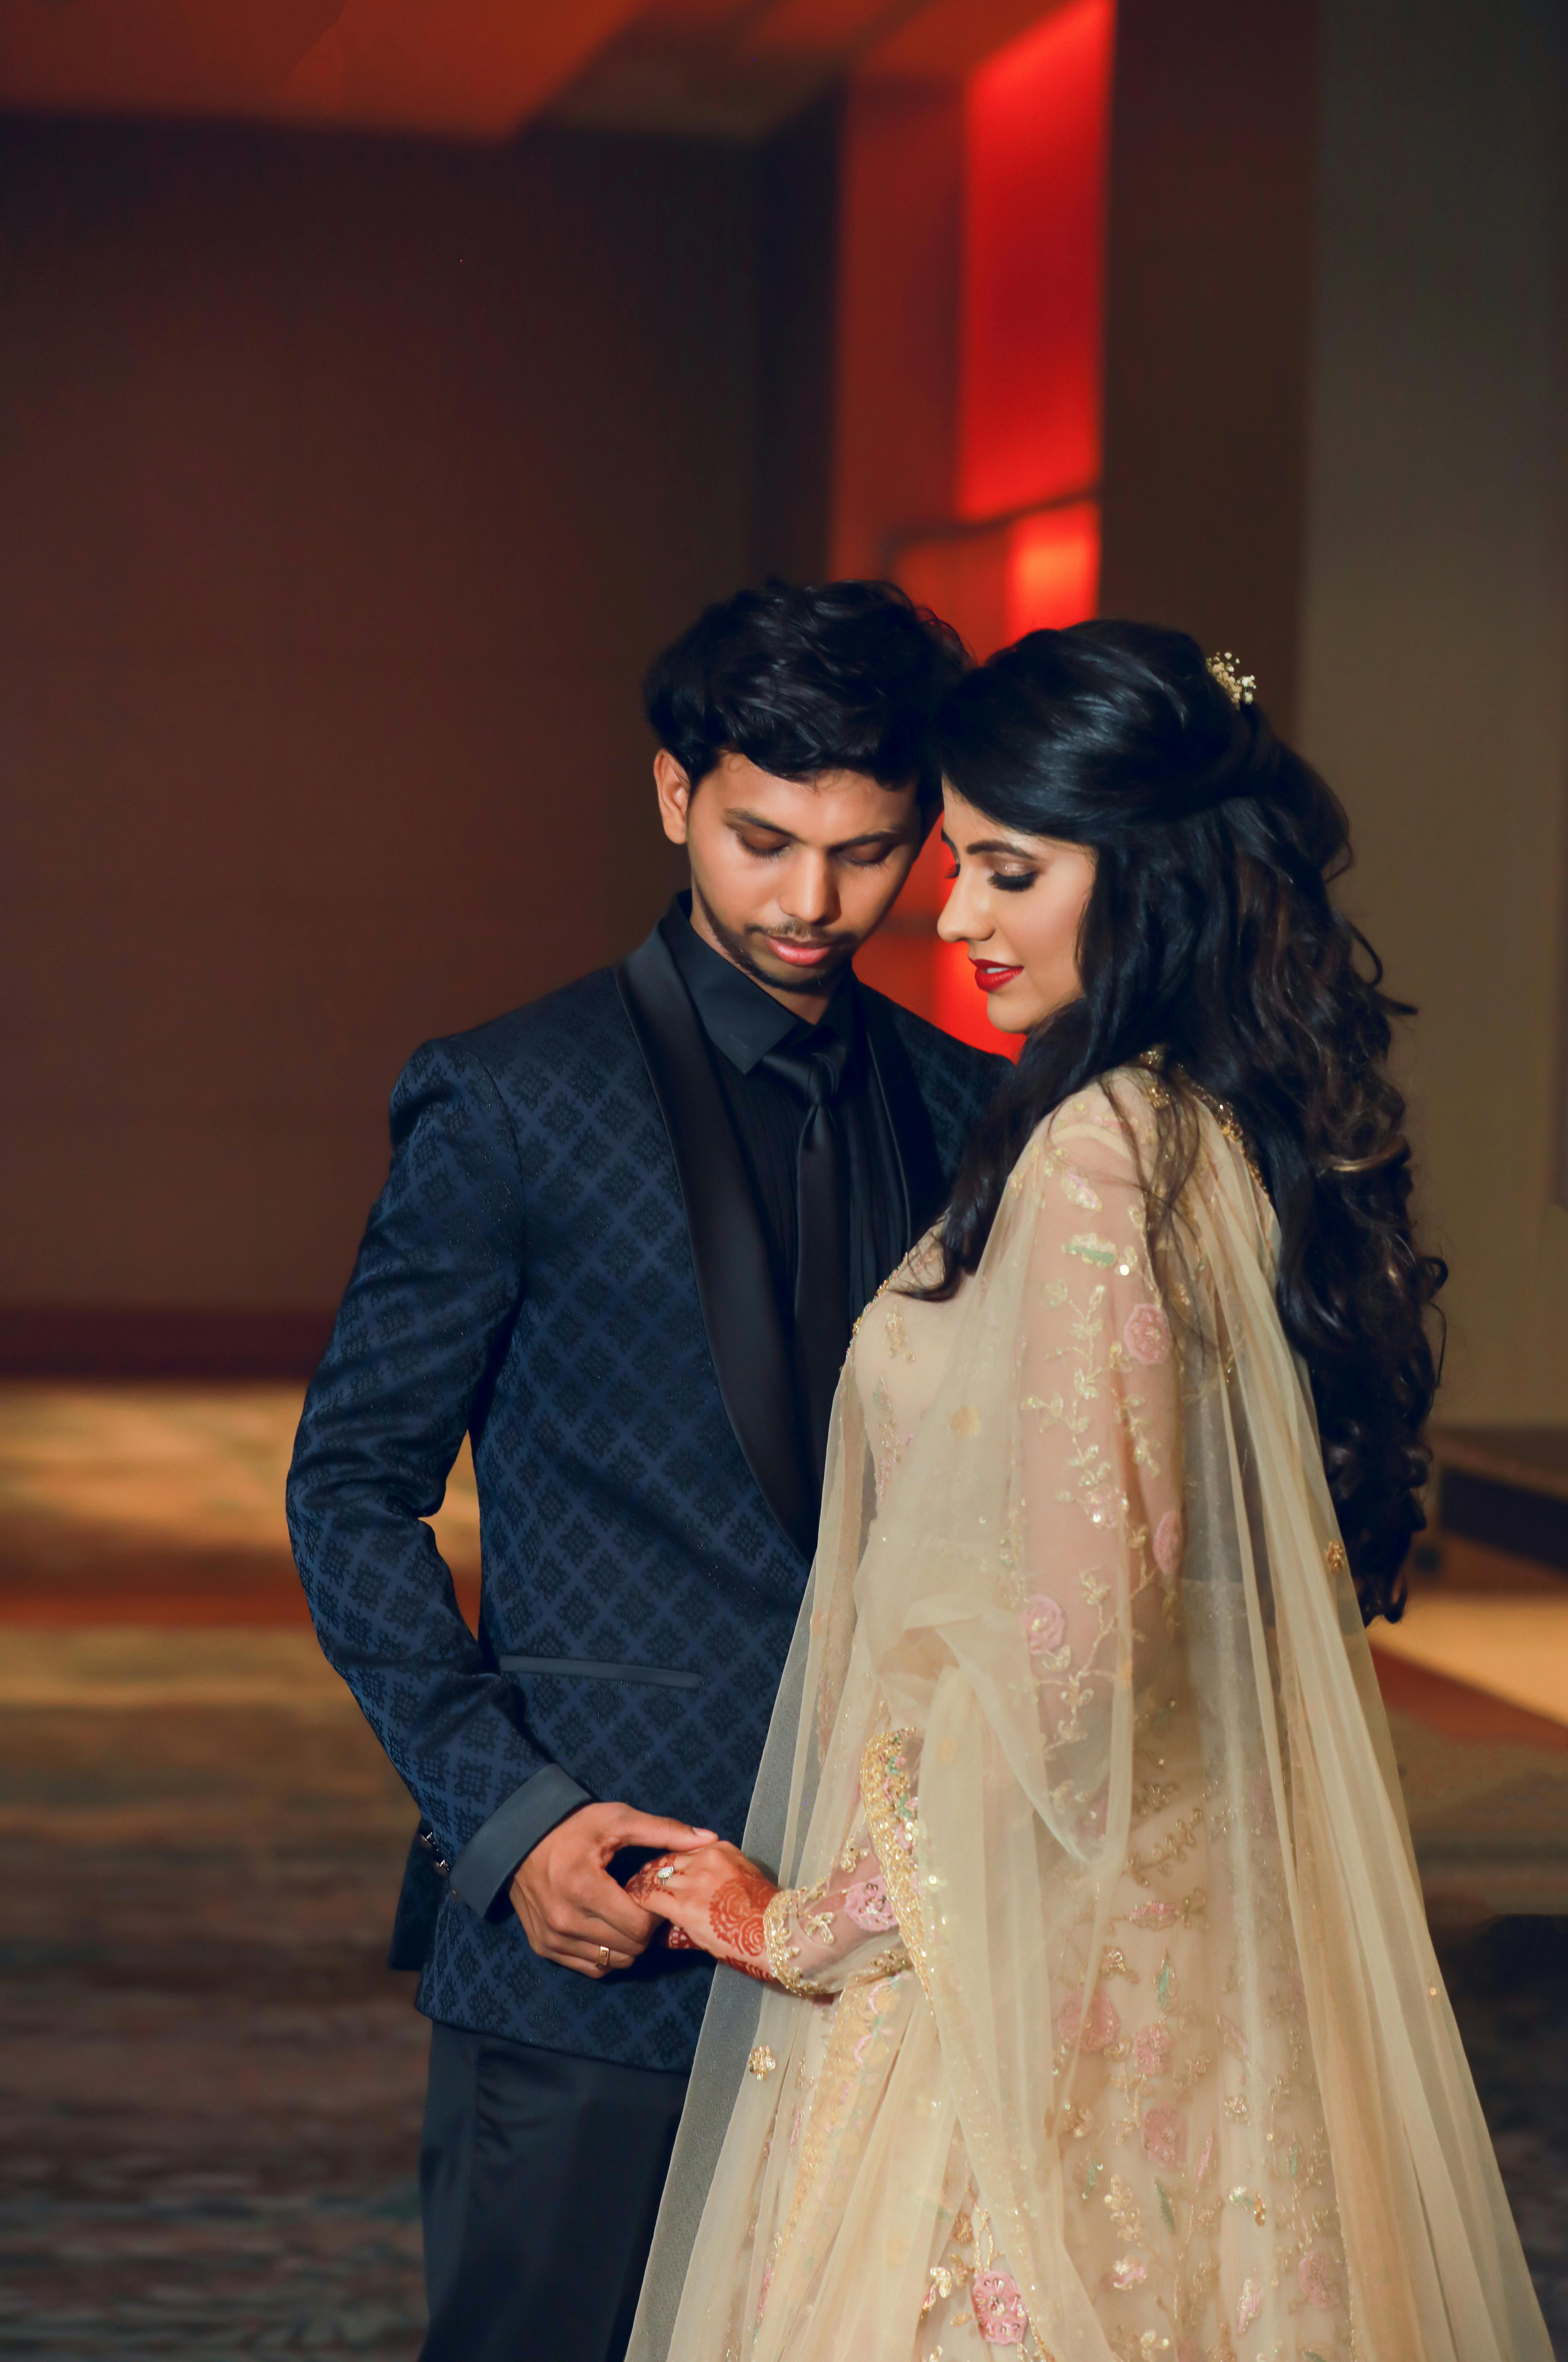 Candid Couple Shot - Bride in a Lehenga and Groom in a Traditional Suit. |  Wedding couple poses, Muslim wedding photography, Indian wedding  photography poses